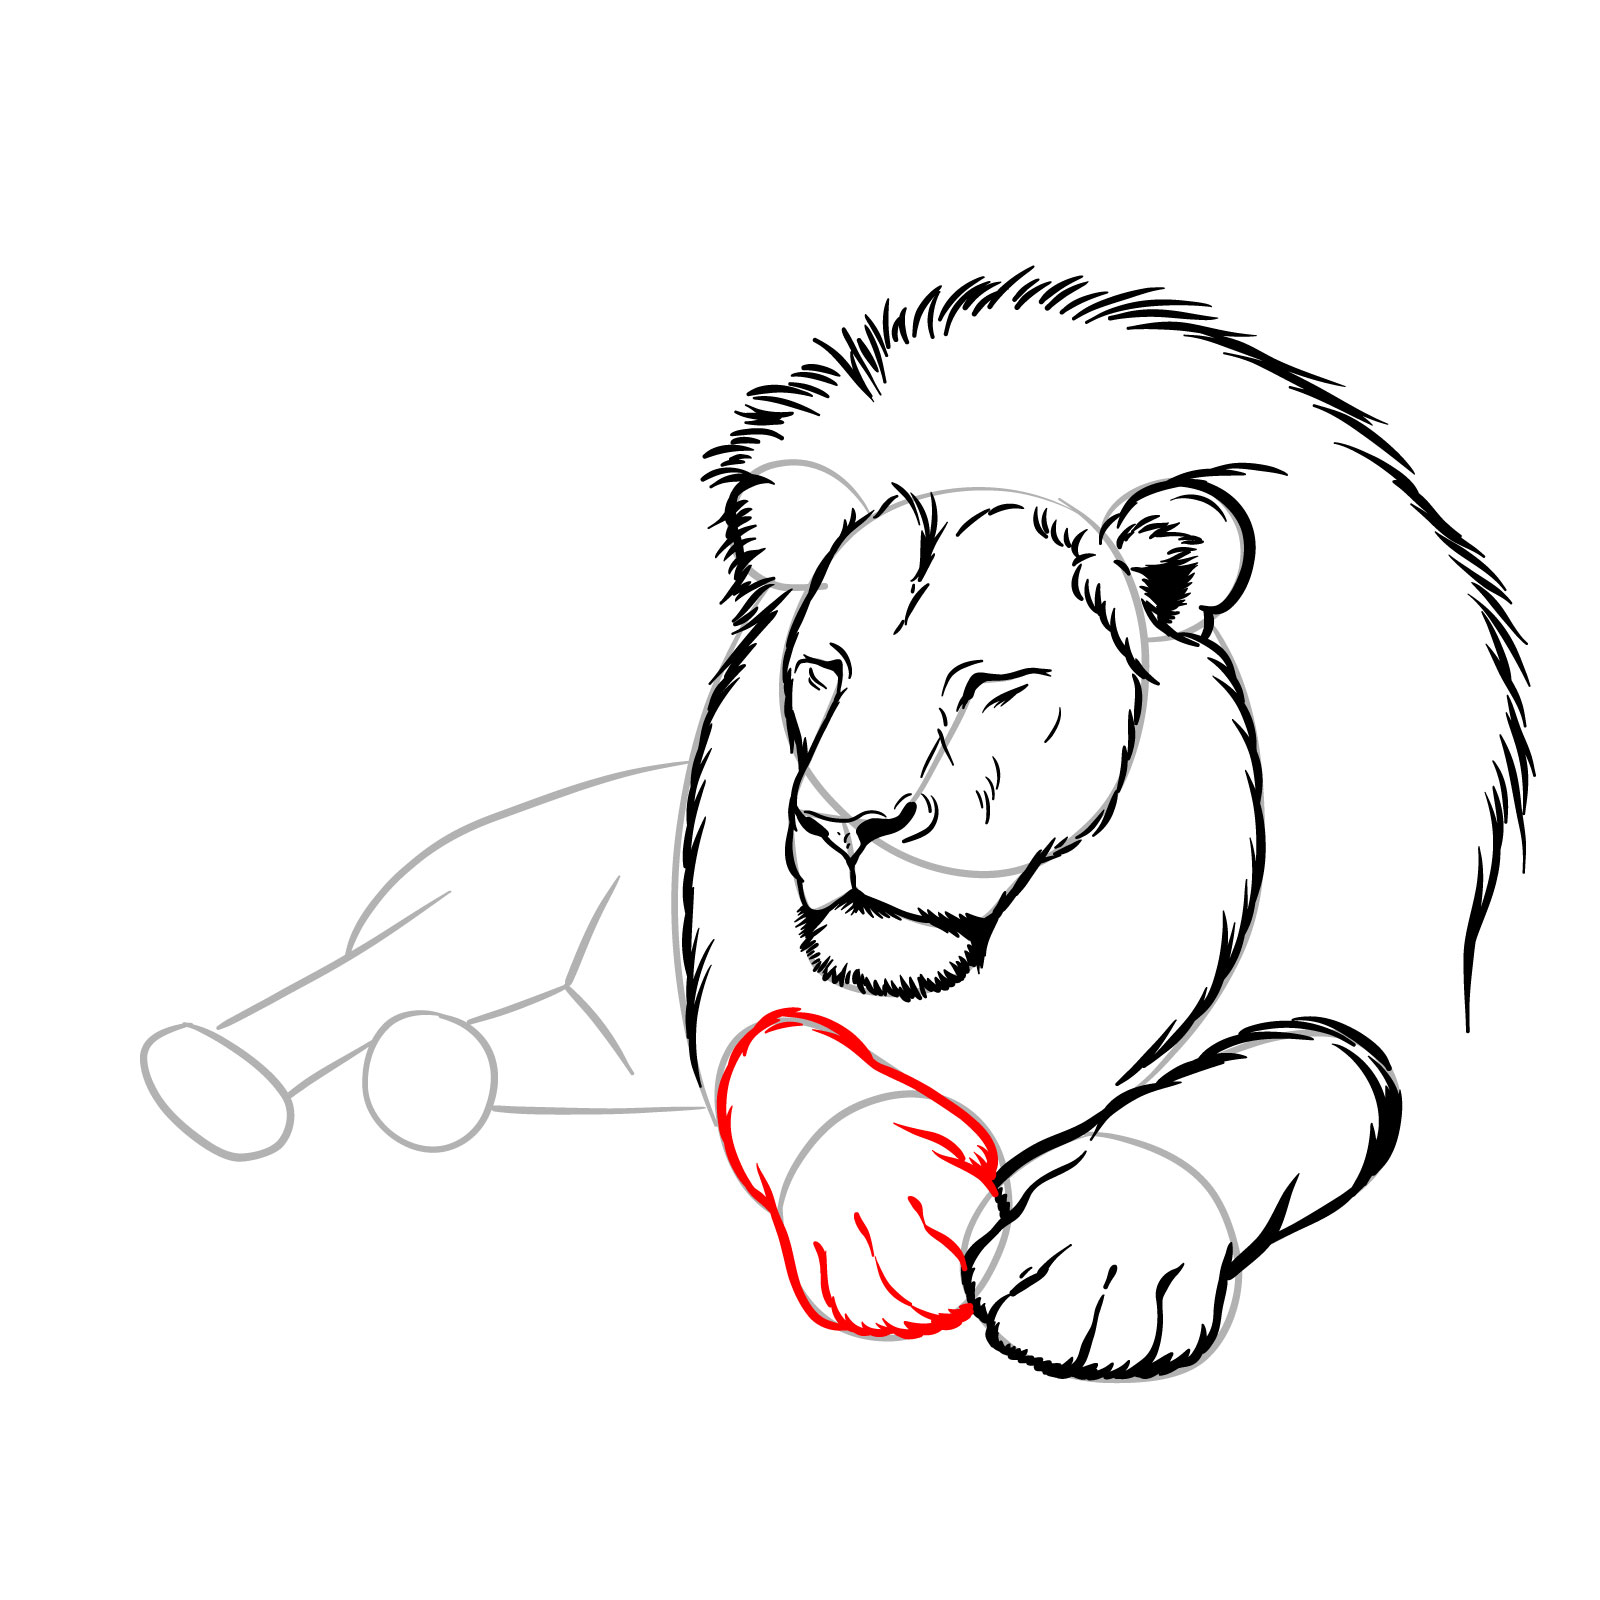 Sleeping lion drawing - Step 10: Sketching the second front leg and toes